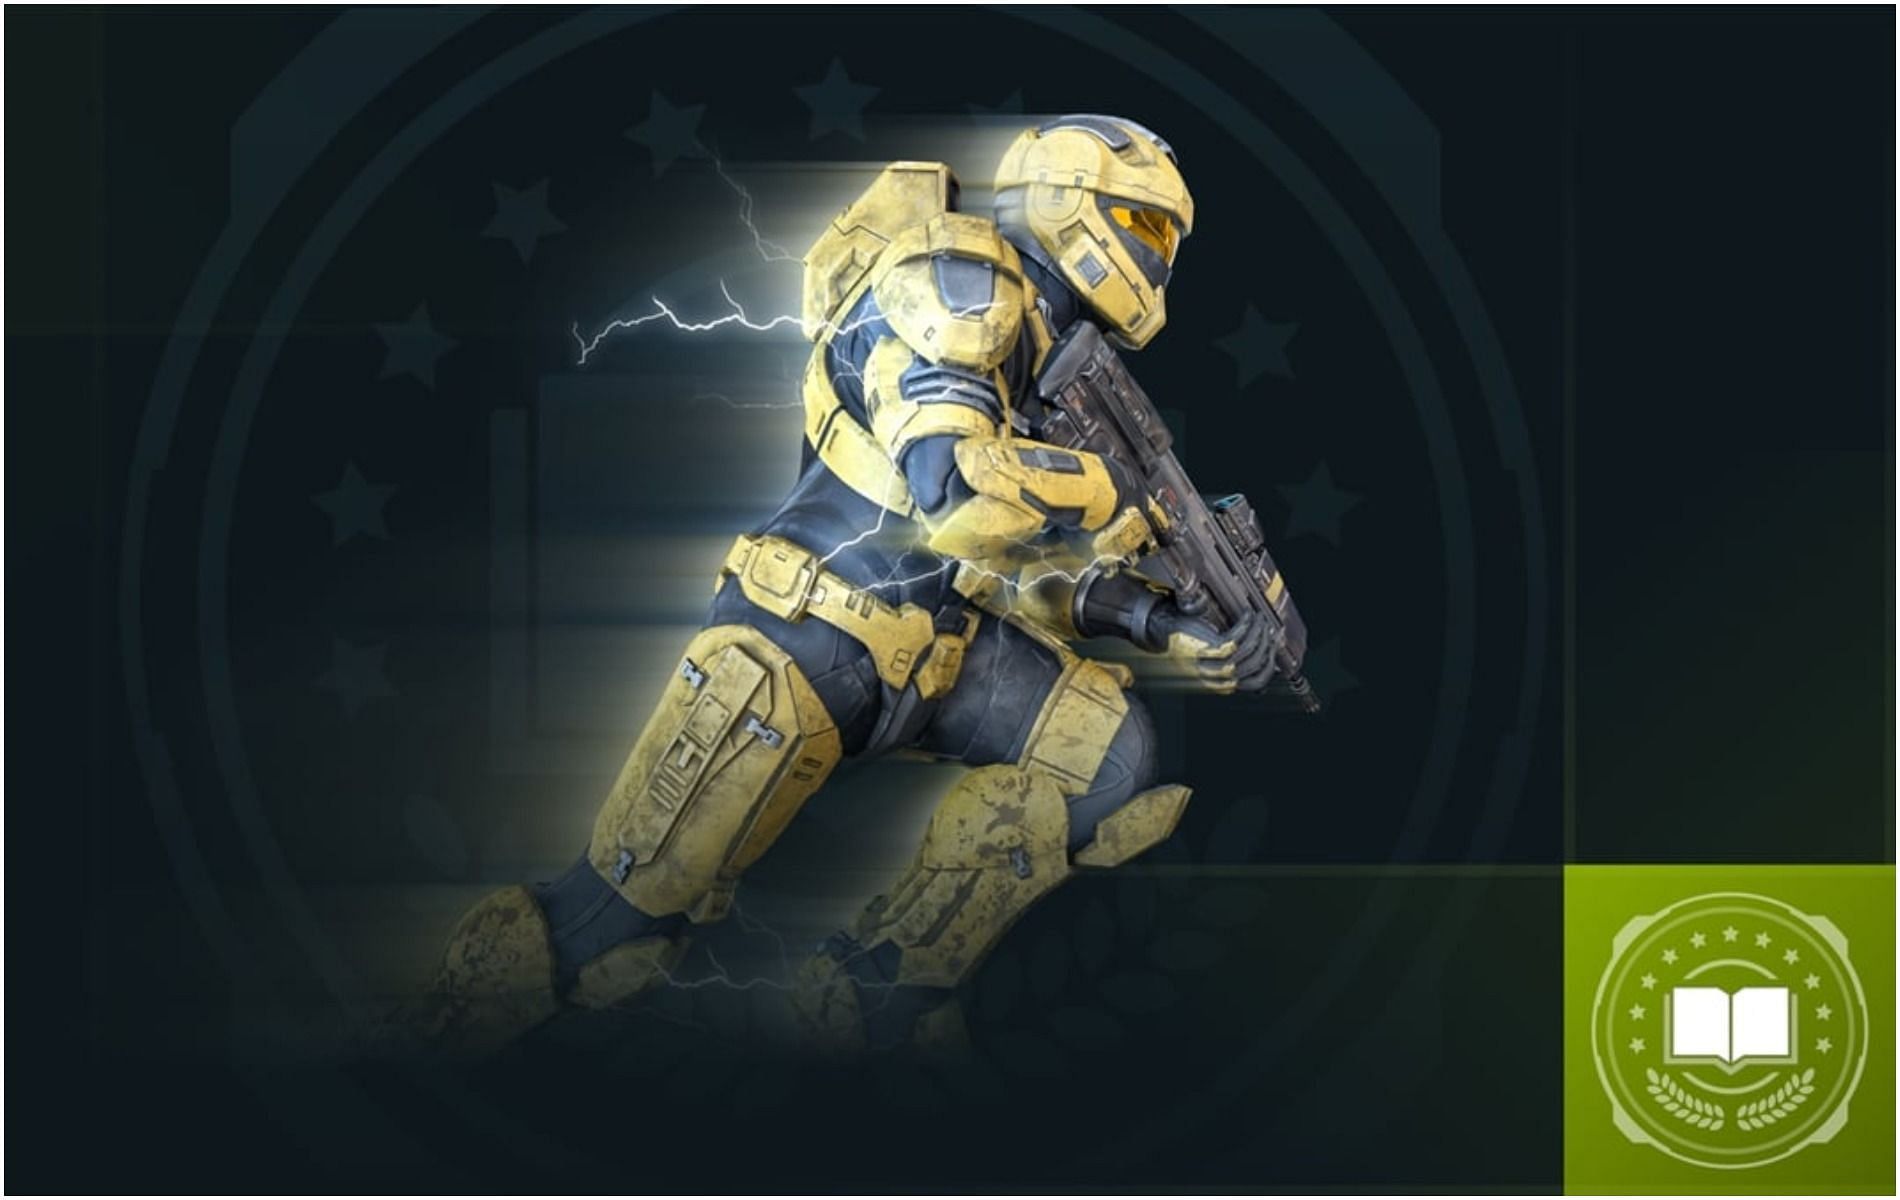 How to unlock Greased Lightning achievement in Halo Infinite